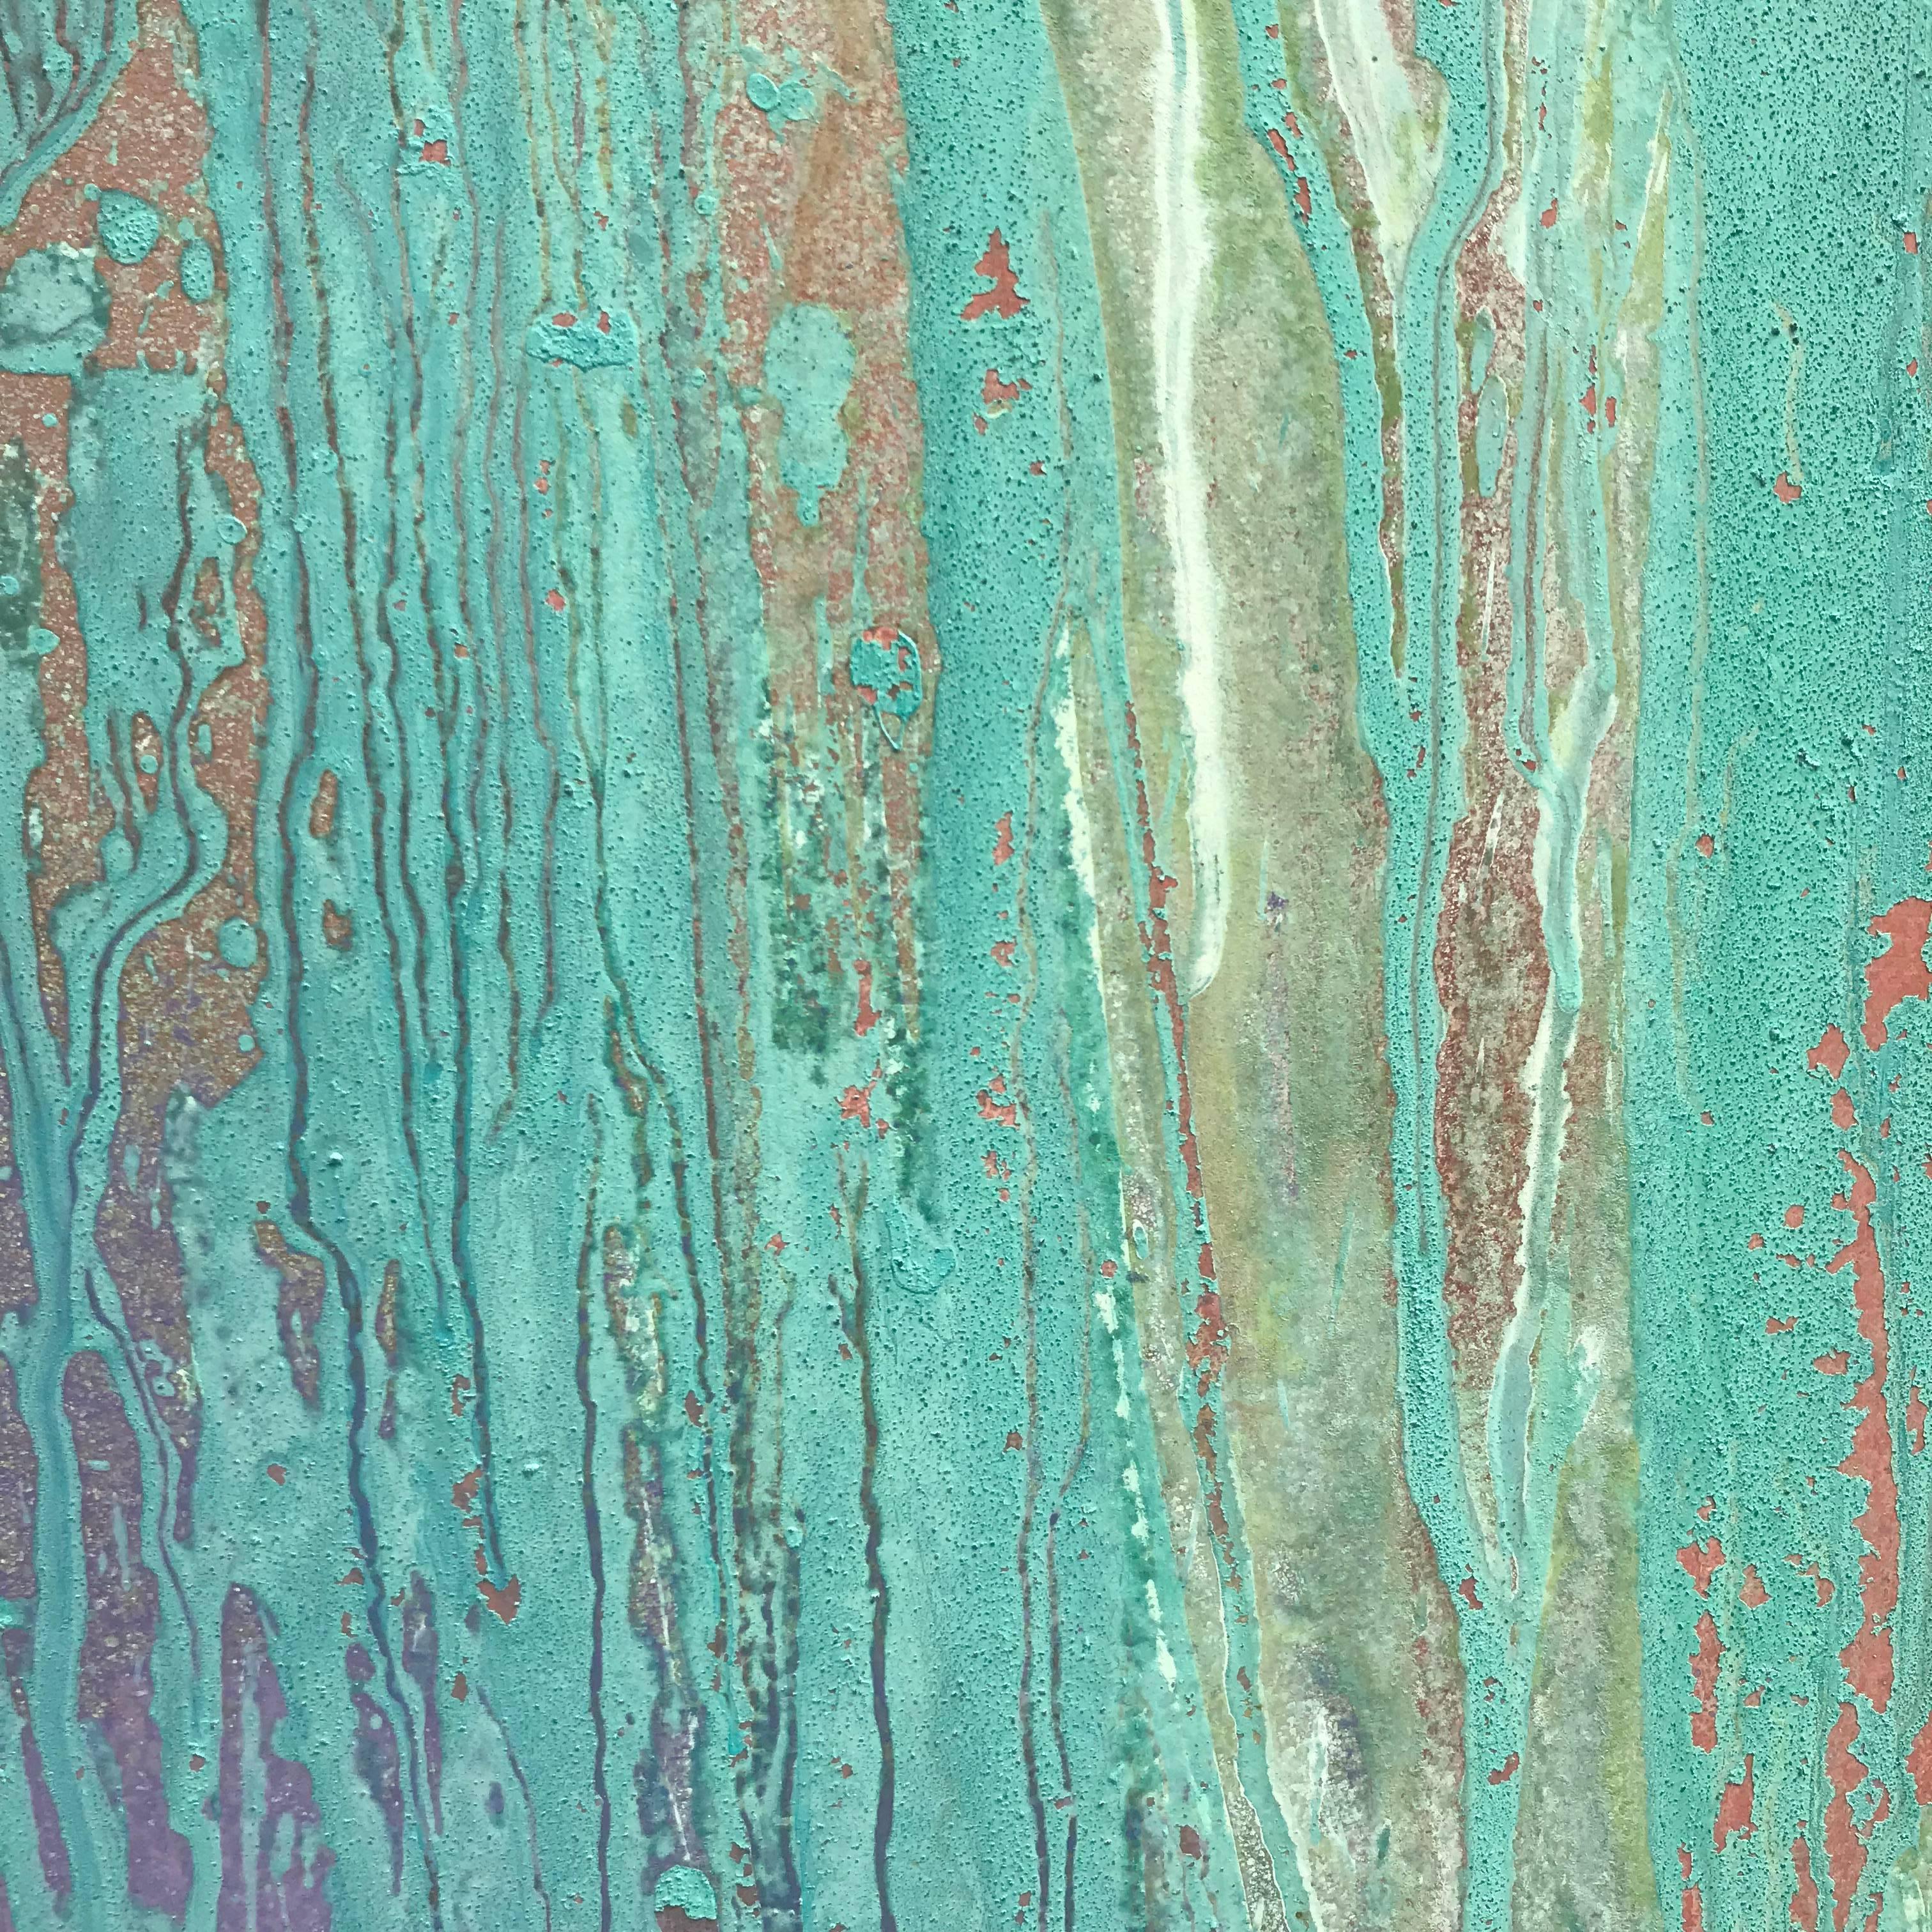 Patina Suspension No. 2 - Abstract Mixed Media Art by Mary Nelson Sinclair